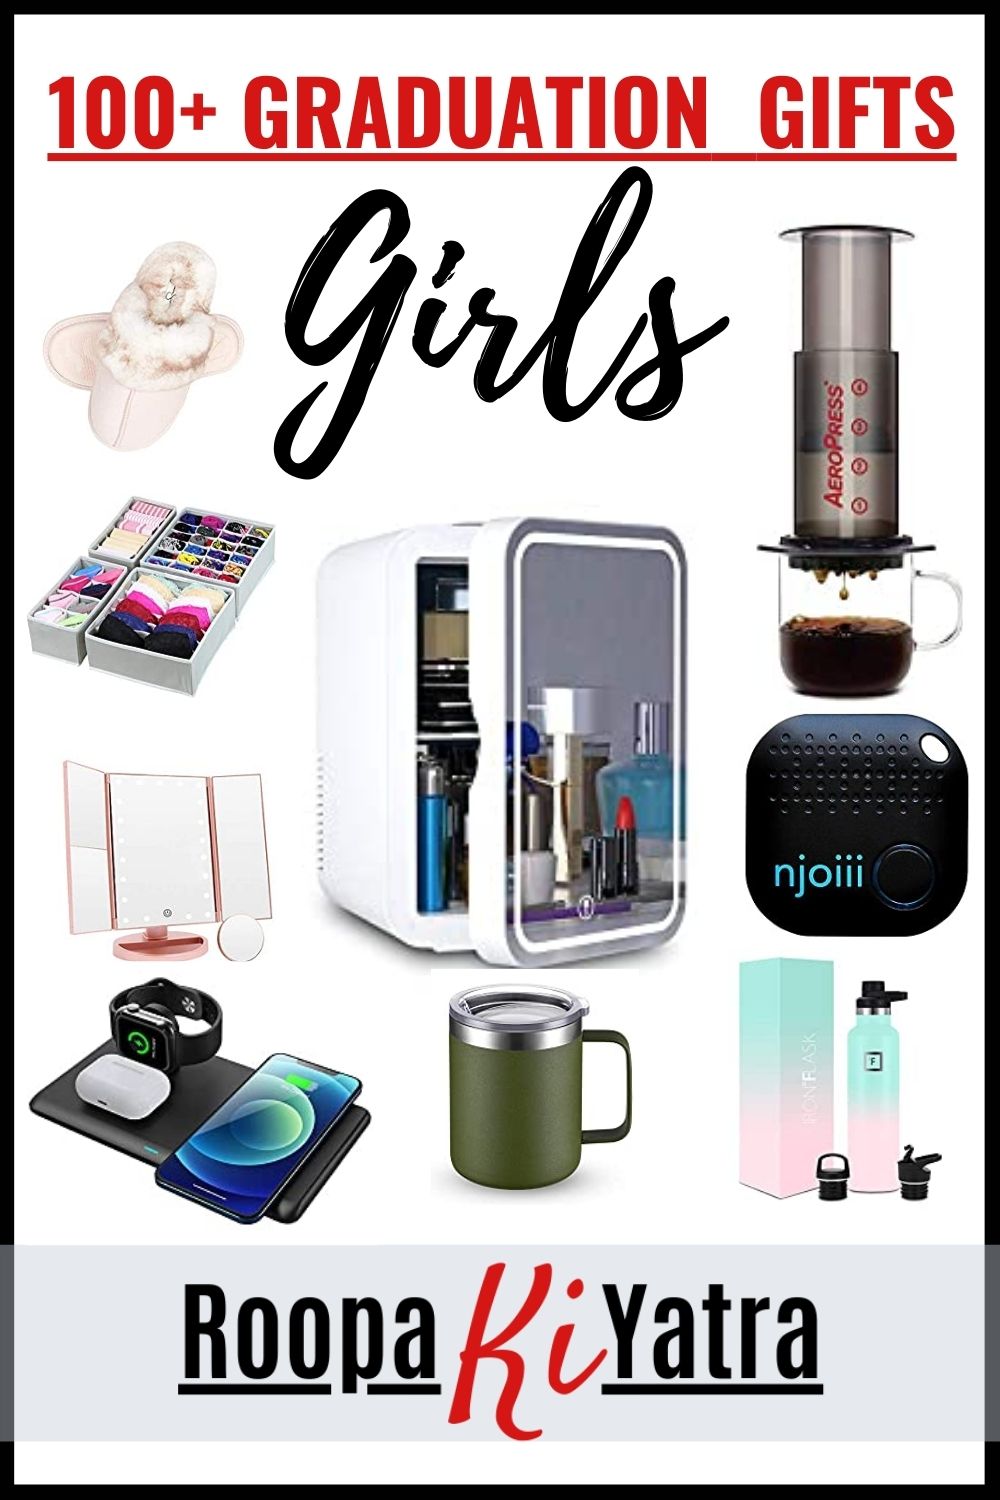 High School Graduation Gifts for Her: 13 Absolute Best Ideas